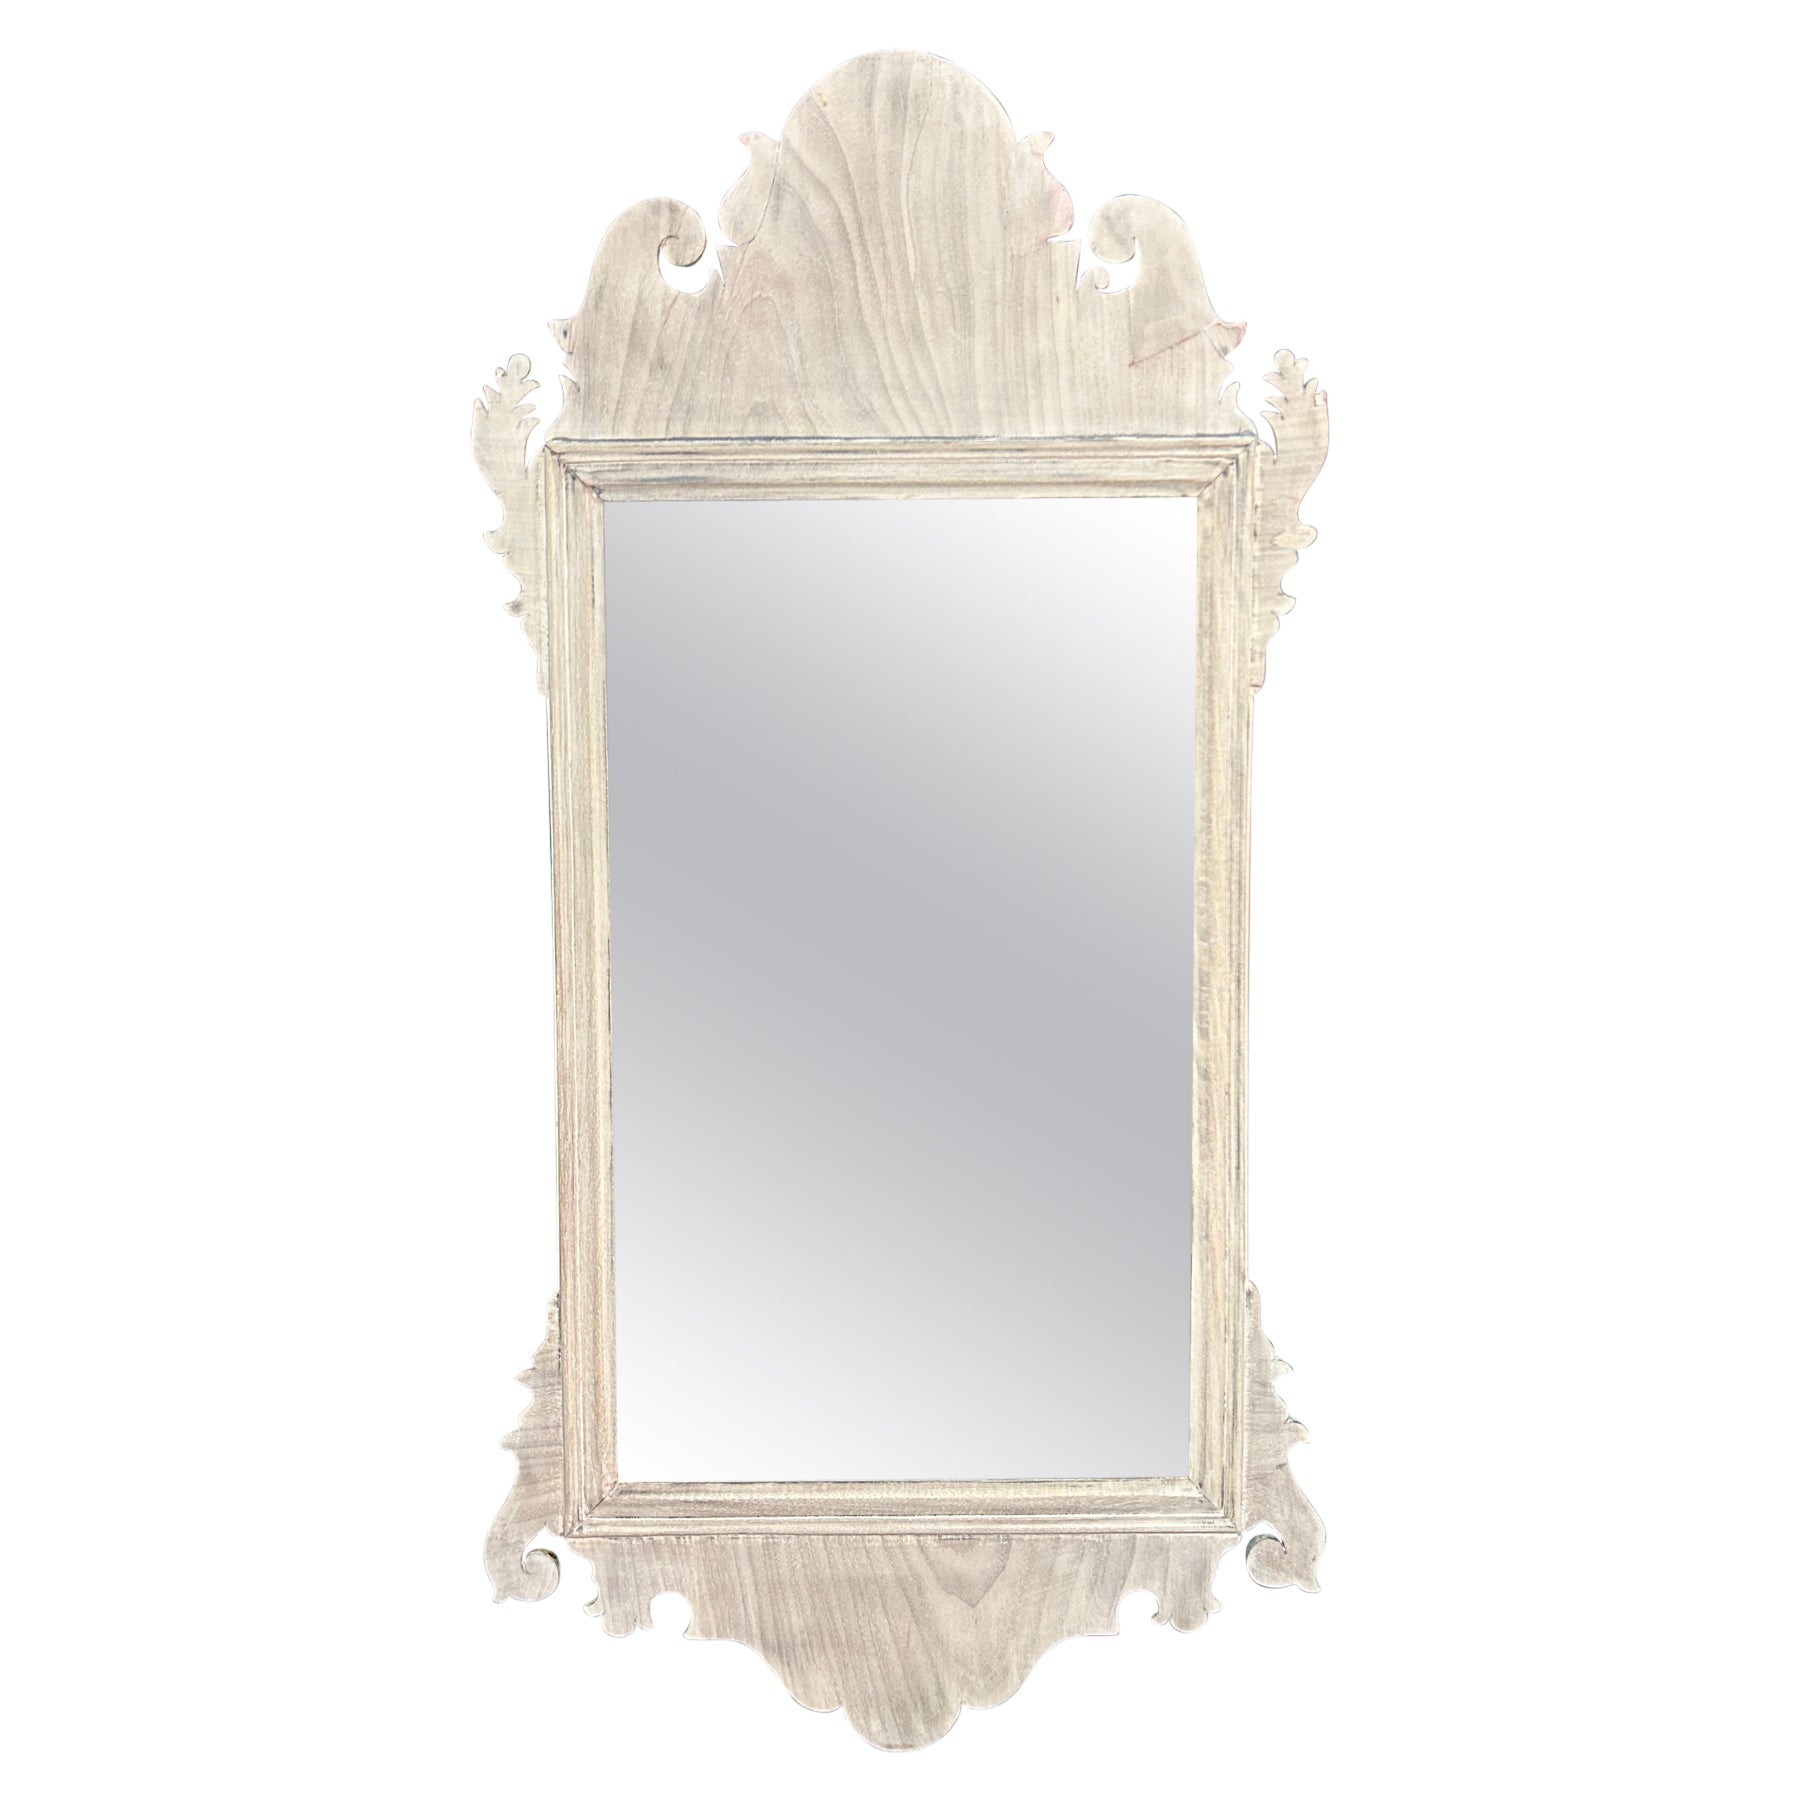 18th Century Federal Chippendale style wall Mirror